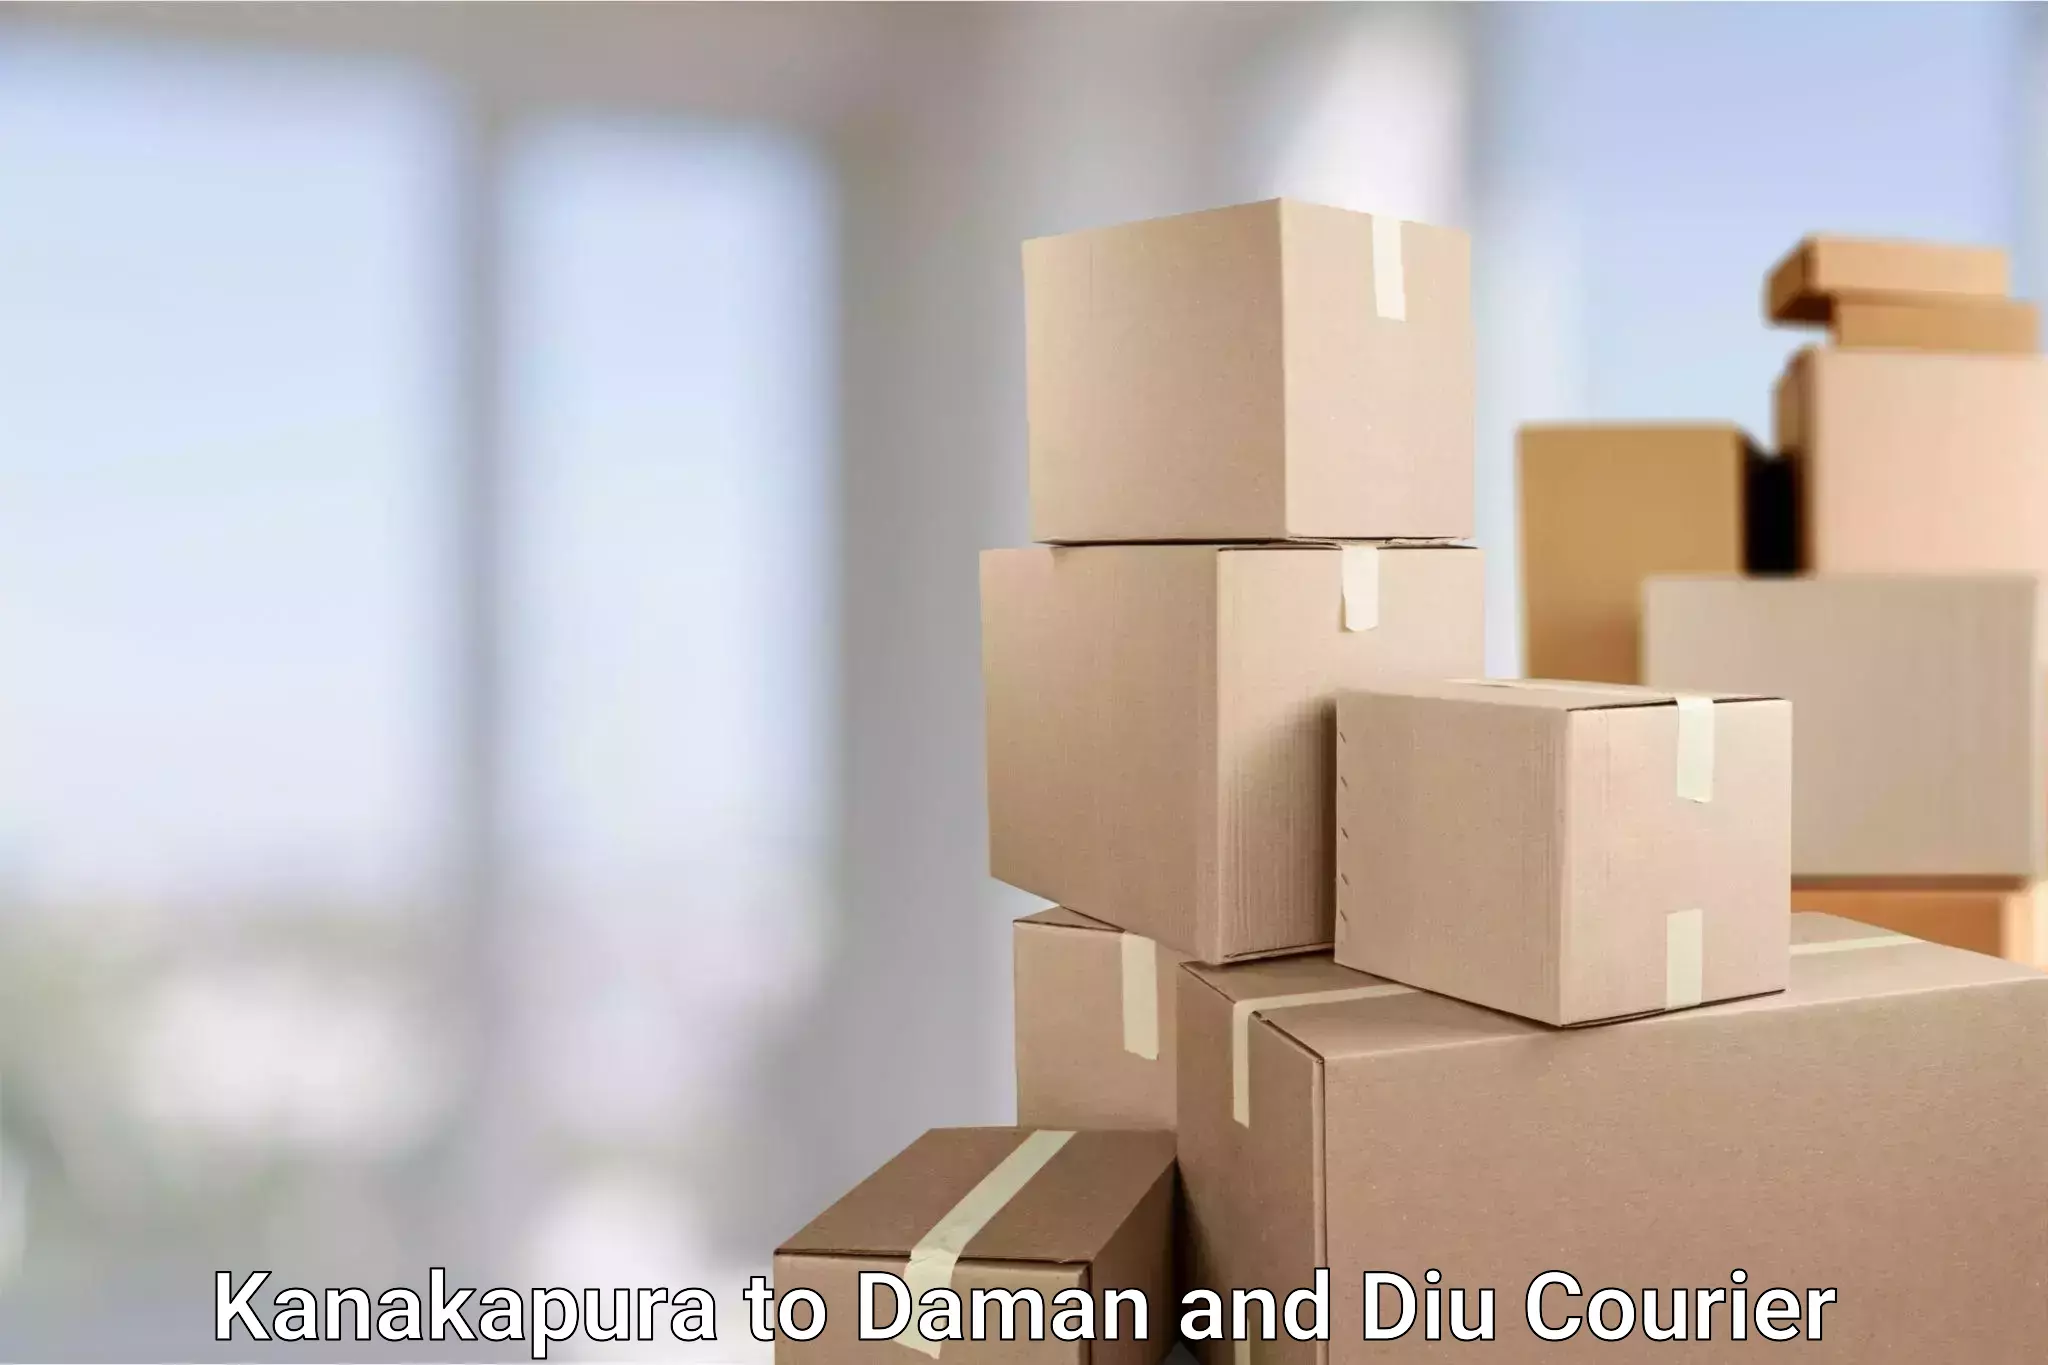 End-to-end delivery in Kanakapura to Daman and Diu